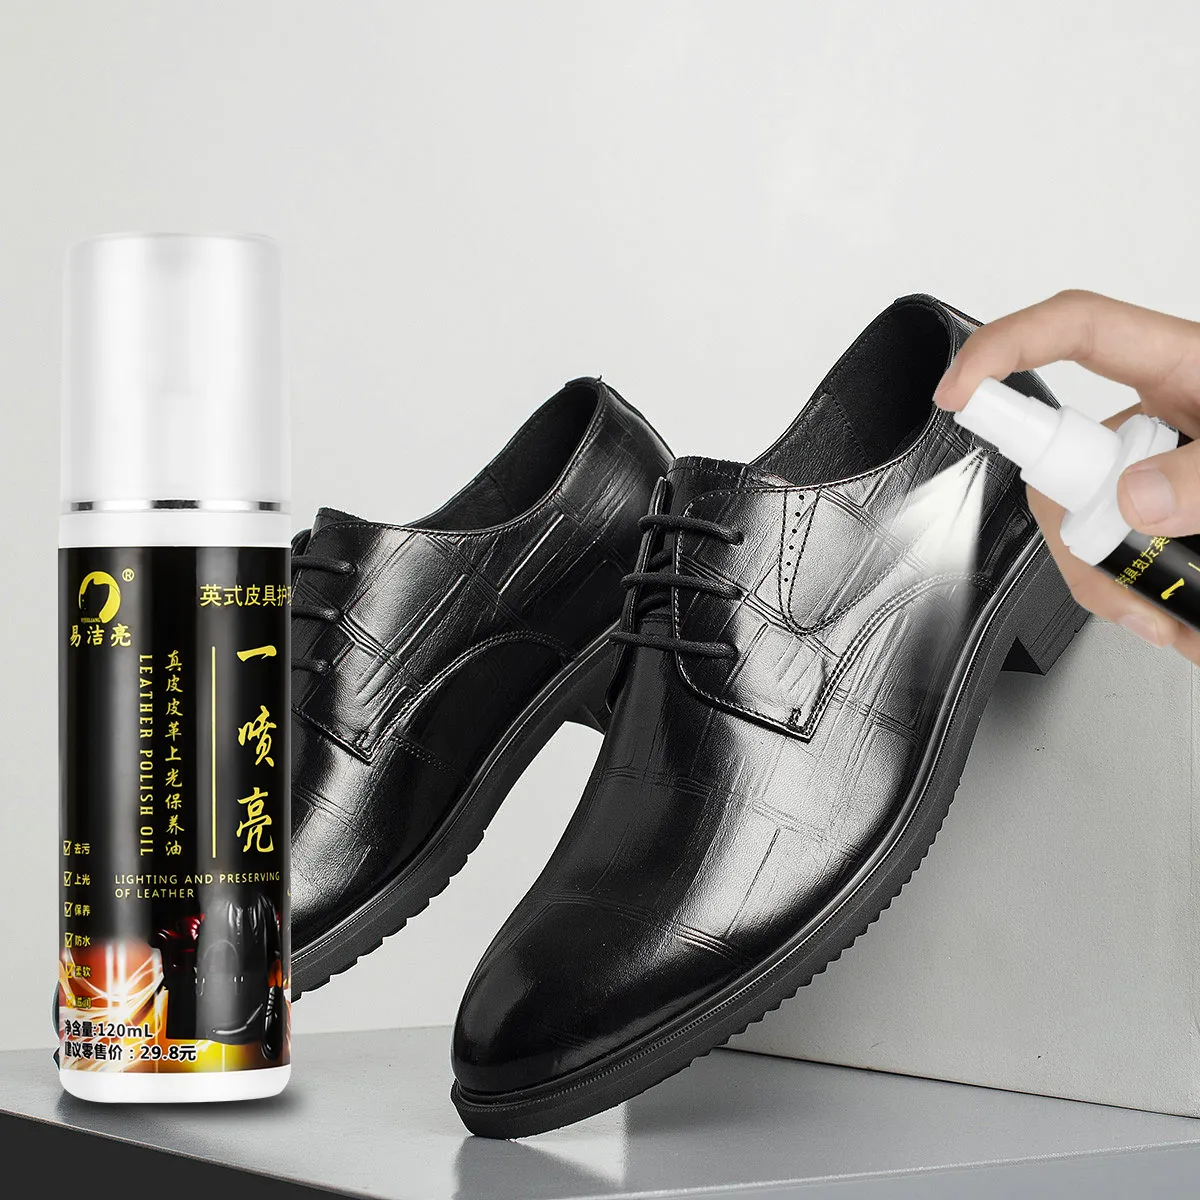 120 ML Multi Purpose Liquid Shoe Polish For Other Leather Articles shoes spray care product